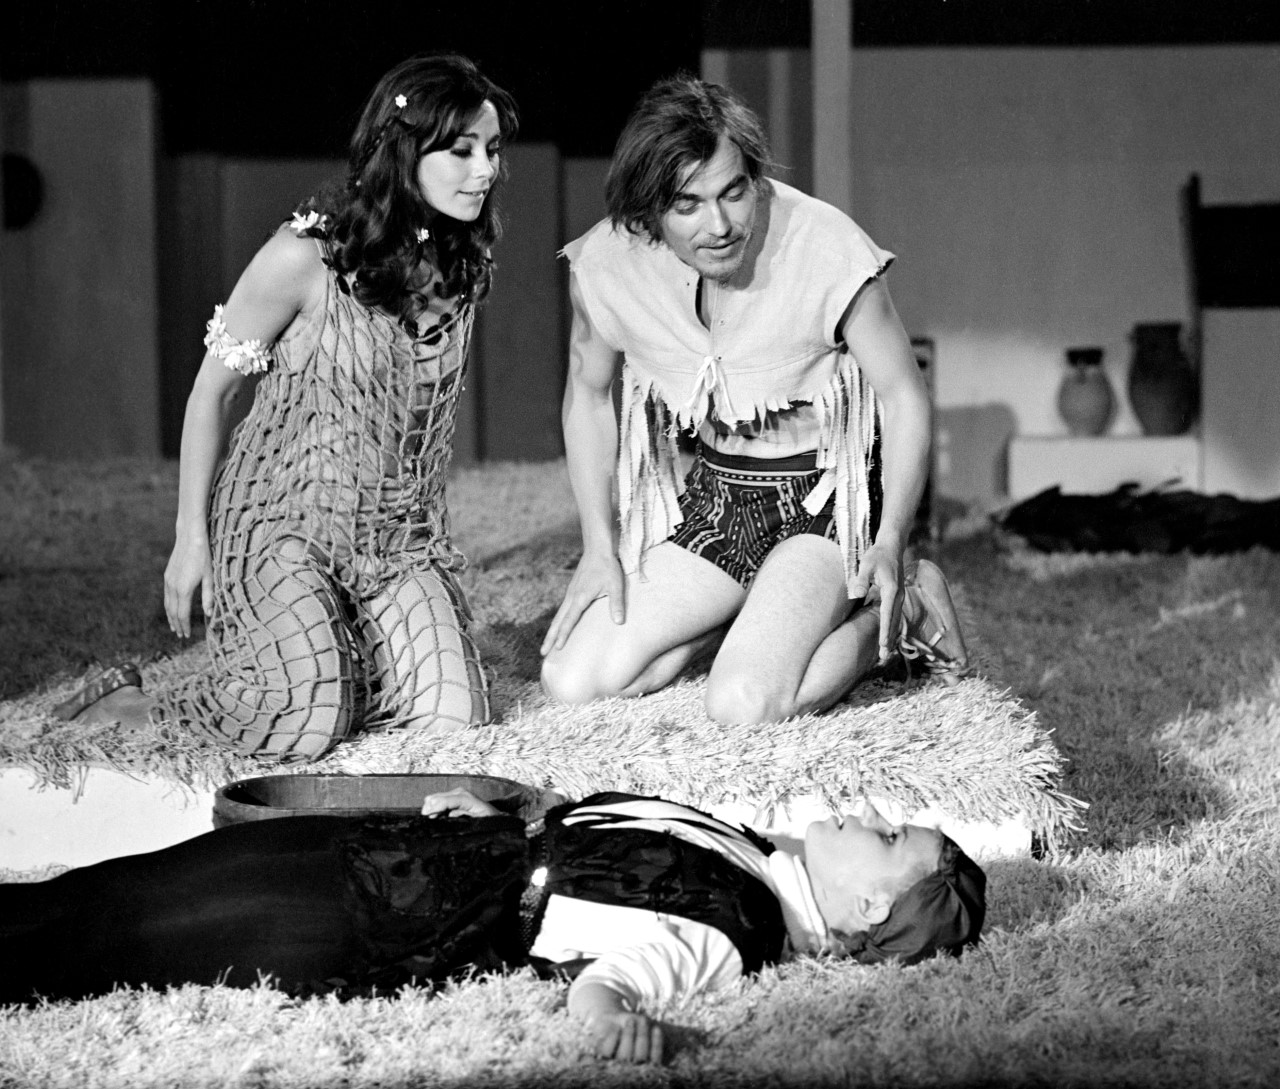 Paradise Lost (1970 Hungarian production)